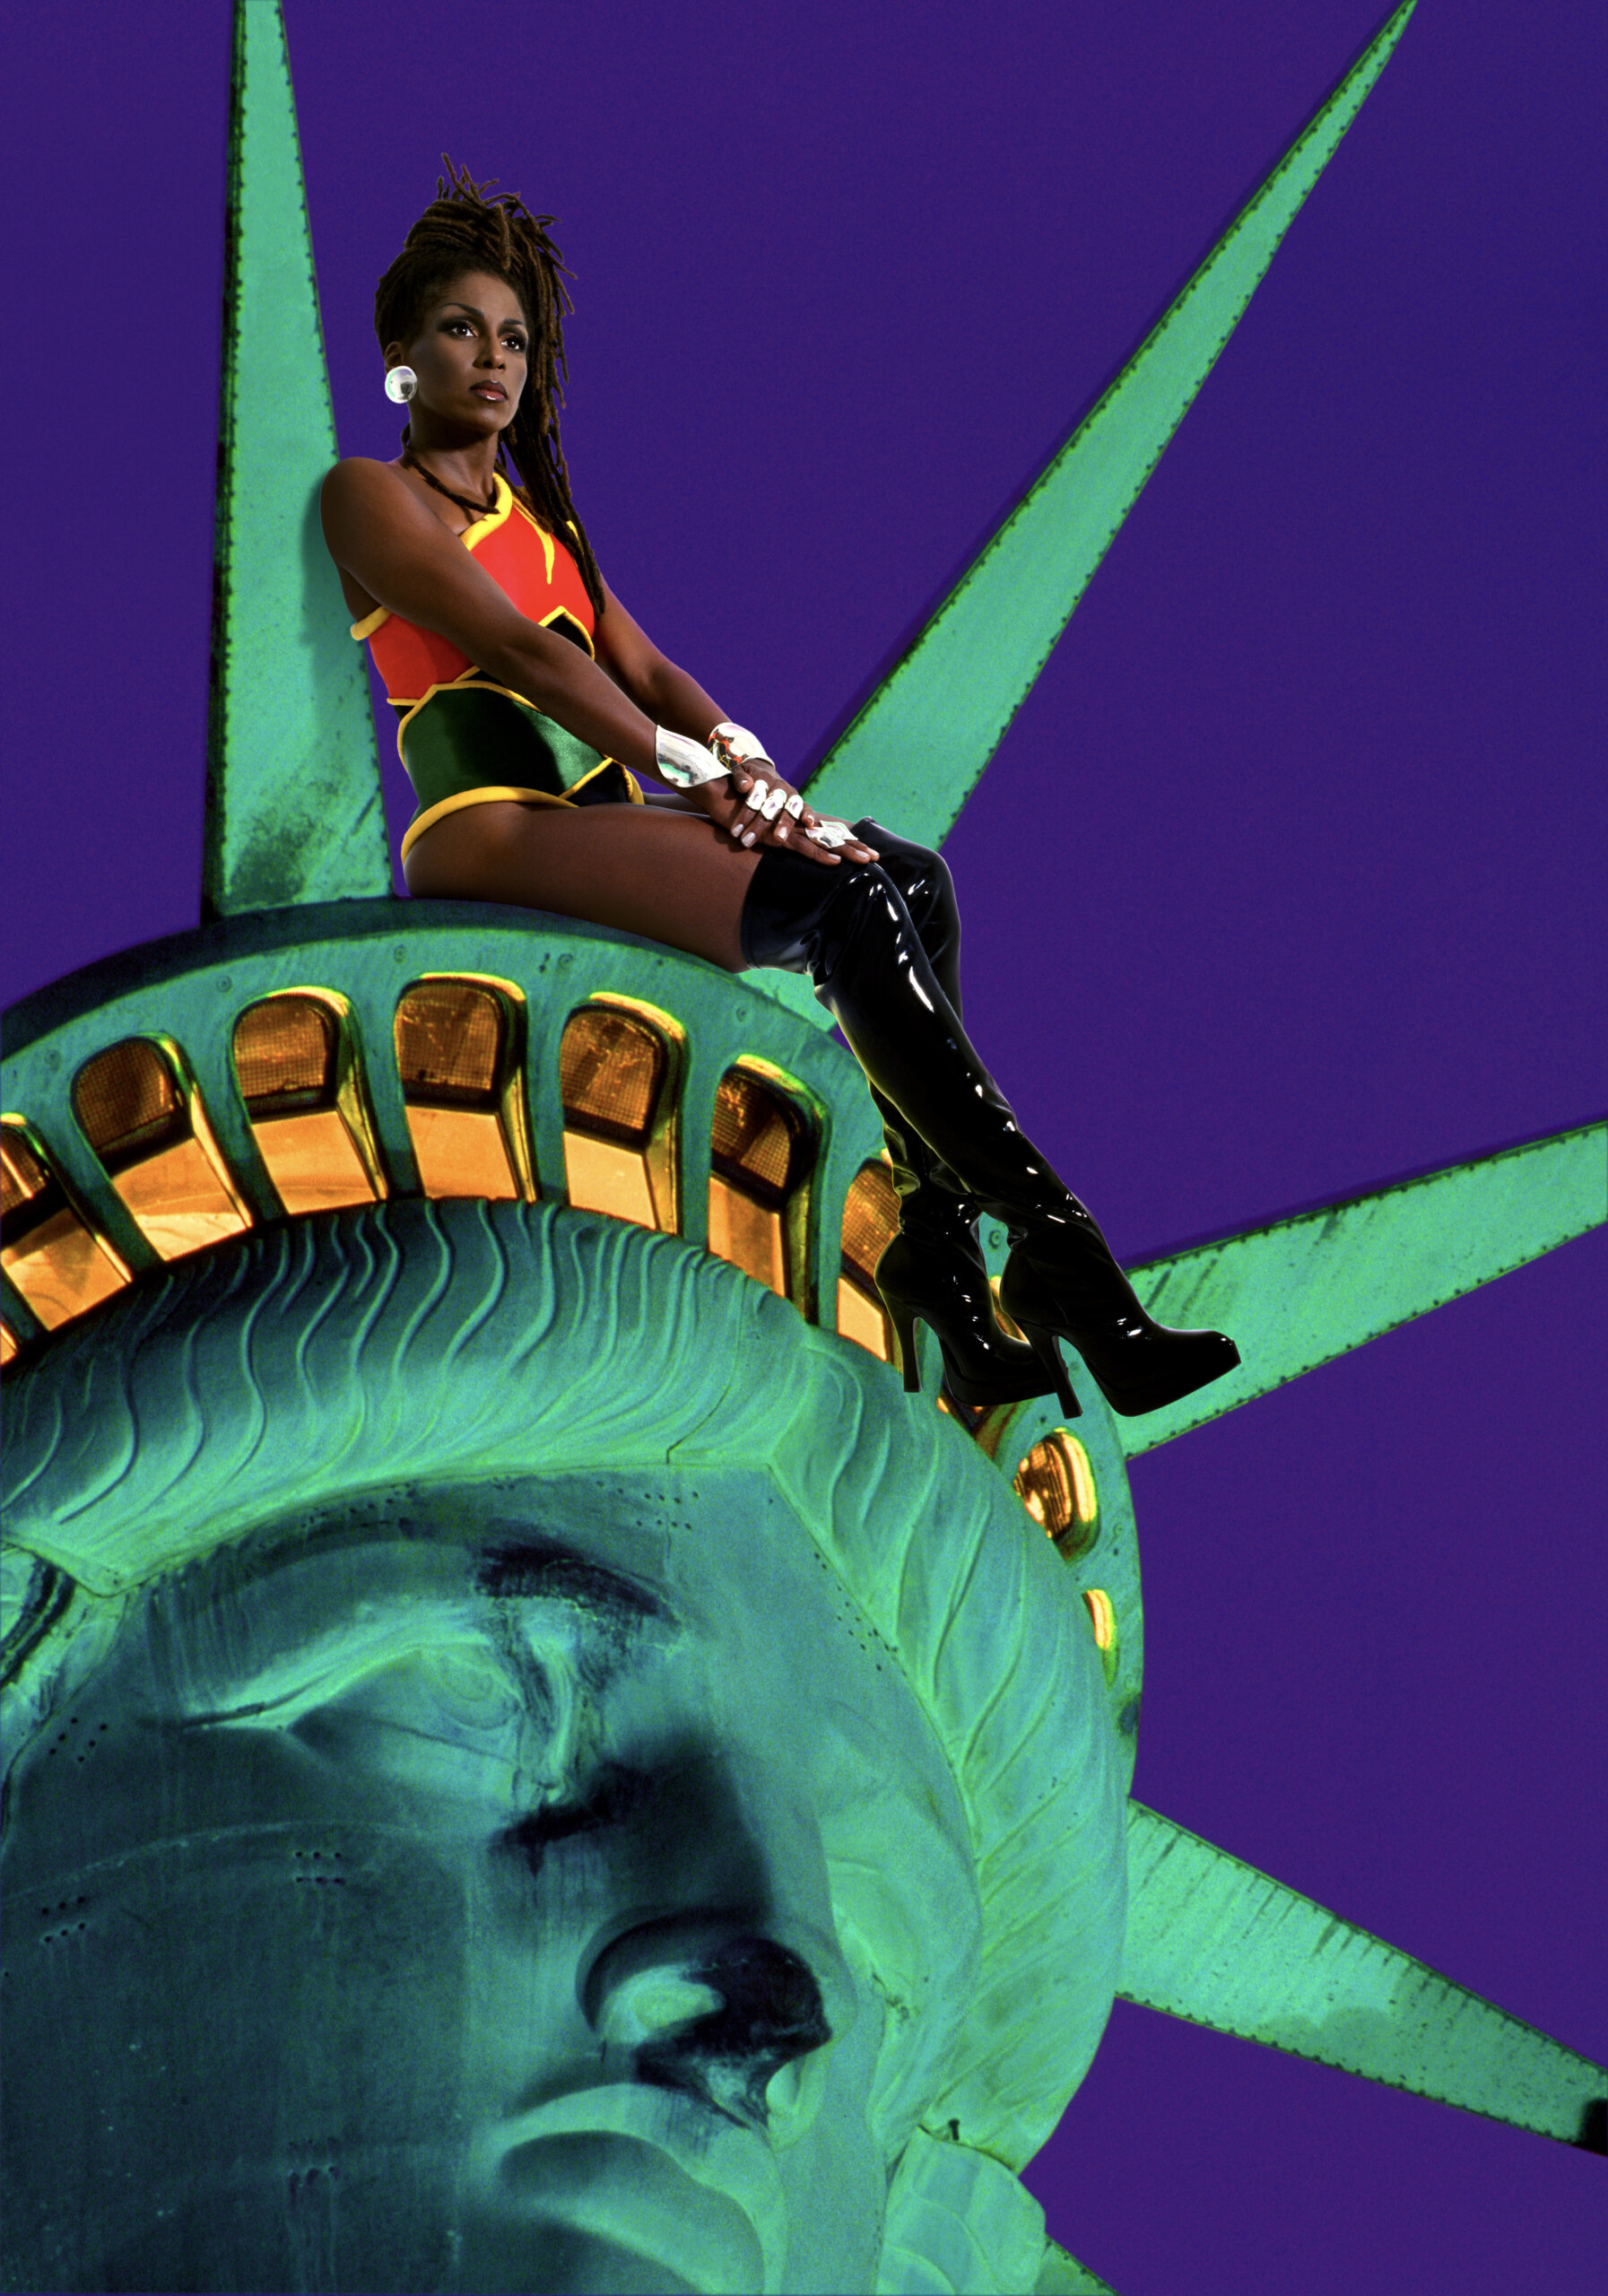 Renee Cox's "Chilling with Liberty" (1998, CibaChrome print, 48 " x 60 ")